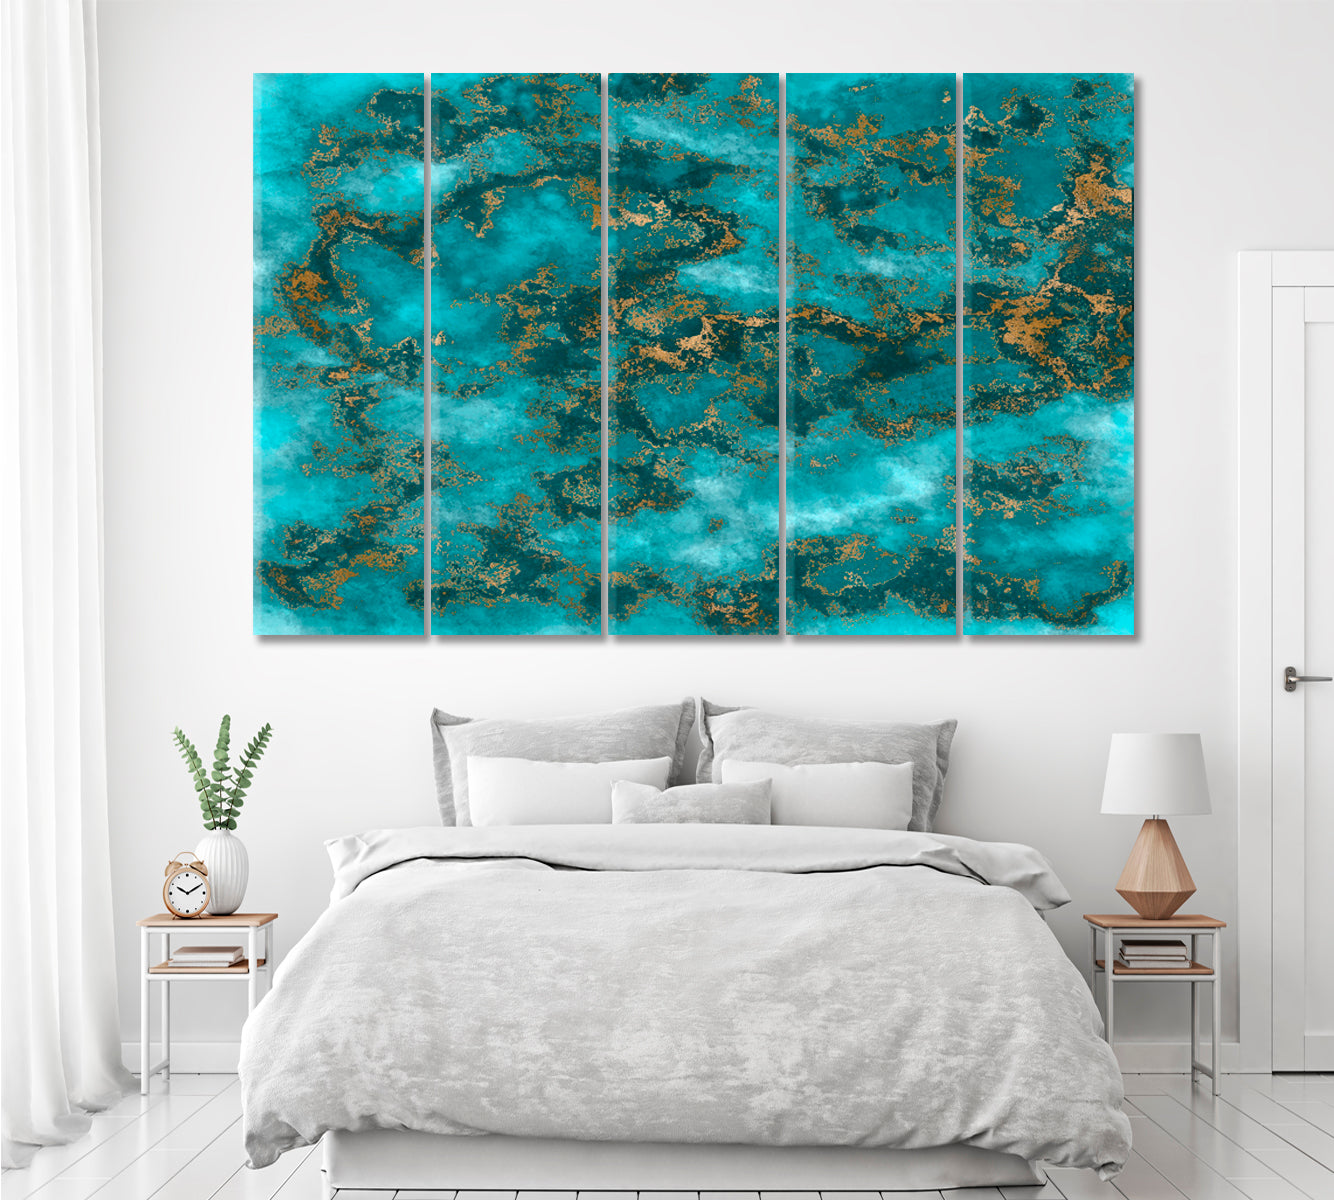 Luxury Turquoise Marble with Gold Veins Canvas Print ArtLexy 5 Panels 36"x24" inches 